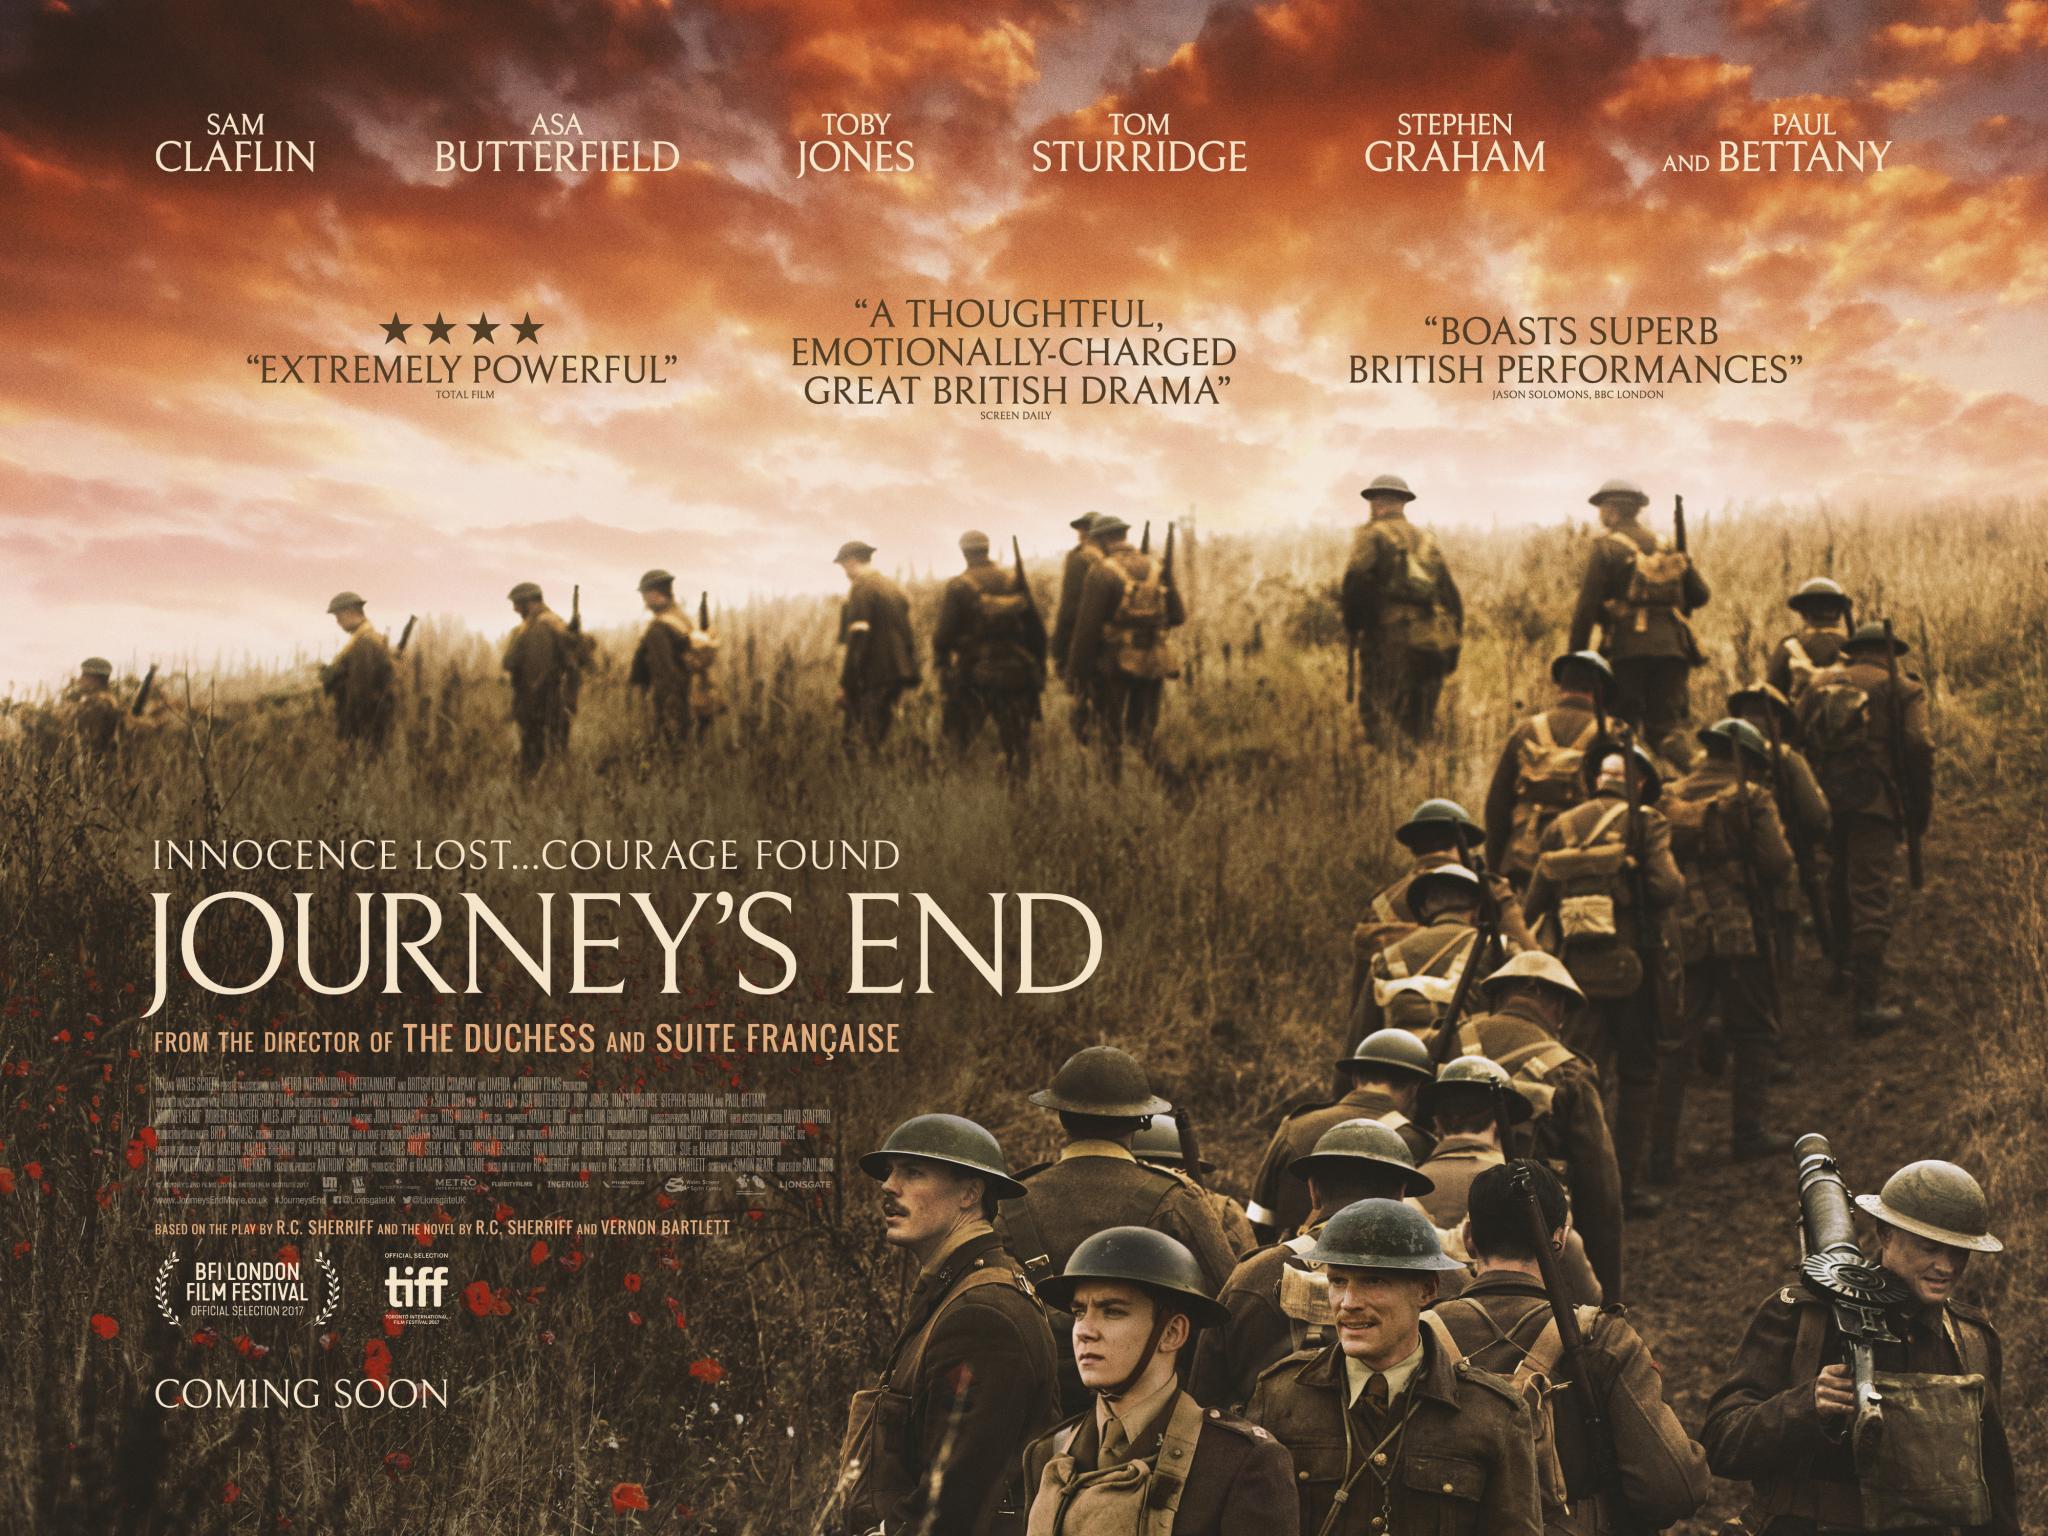 key events in journey's end